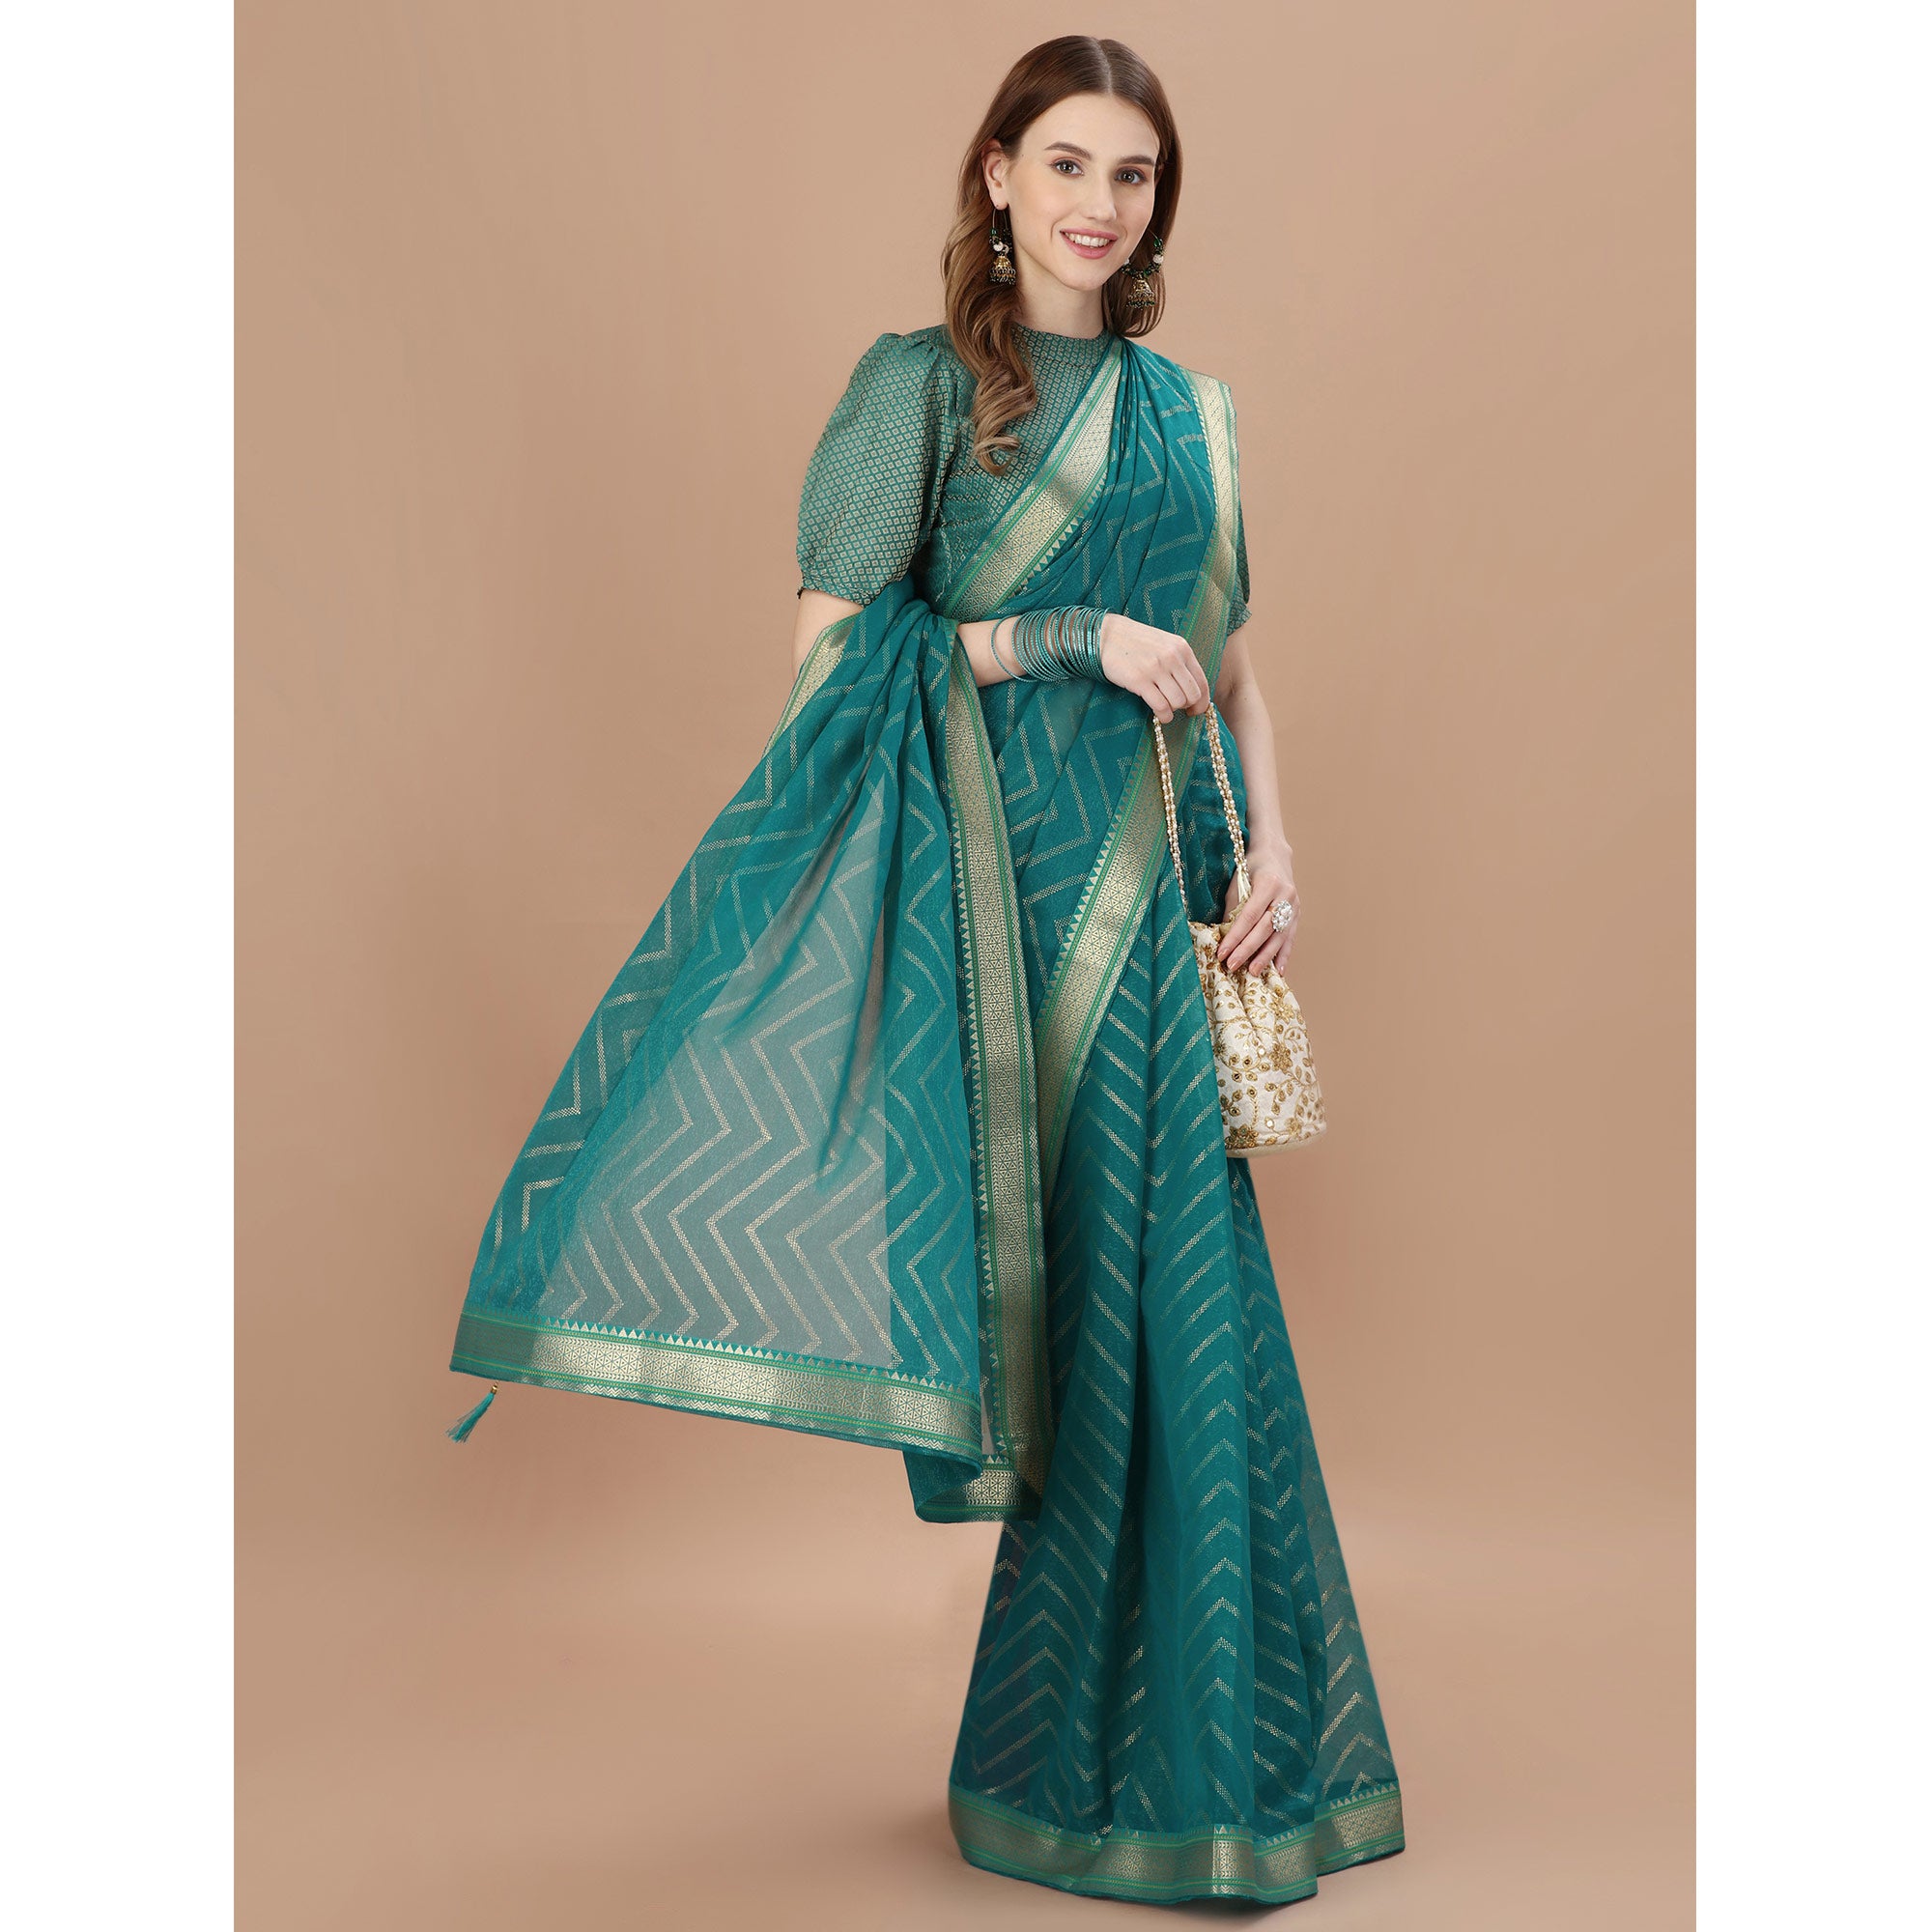 Teal Blue Foil Printed Chiffon Saree With Lace Border